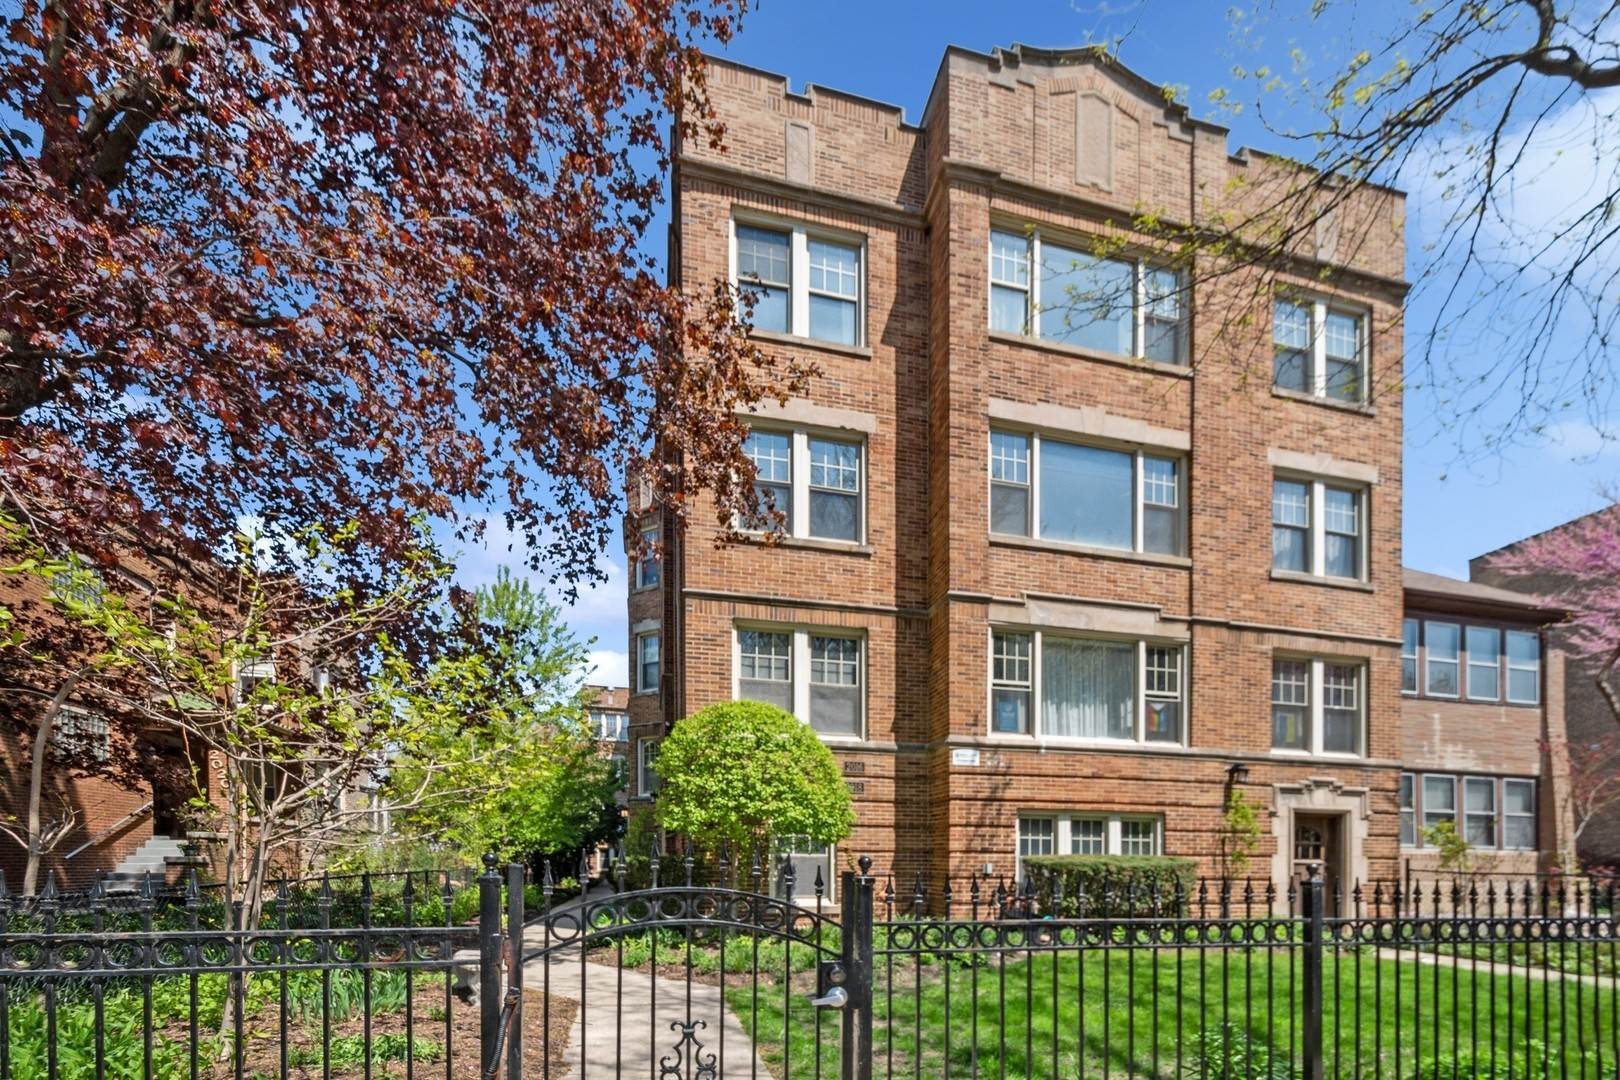 Single Family at Loyola, Chicago, IL 60645